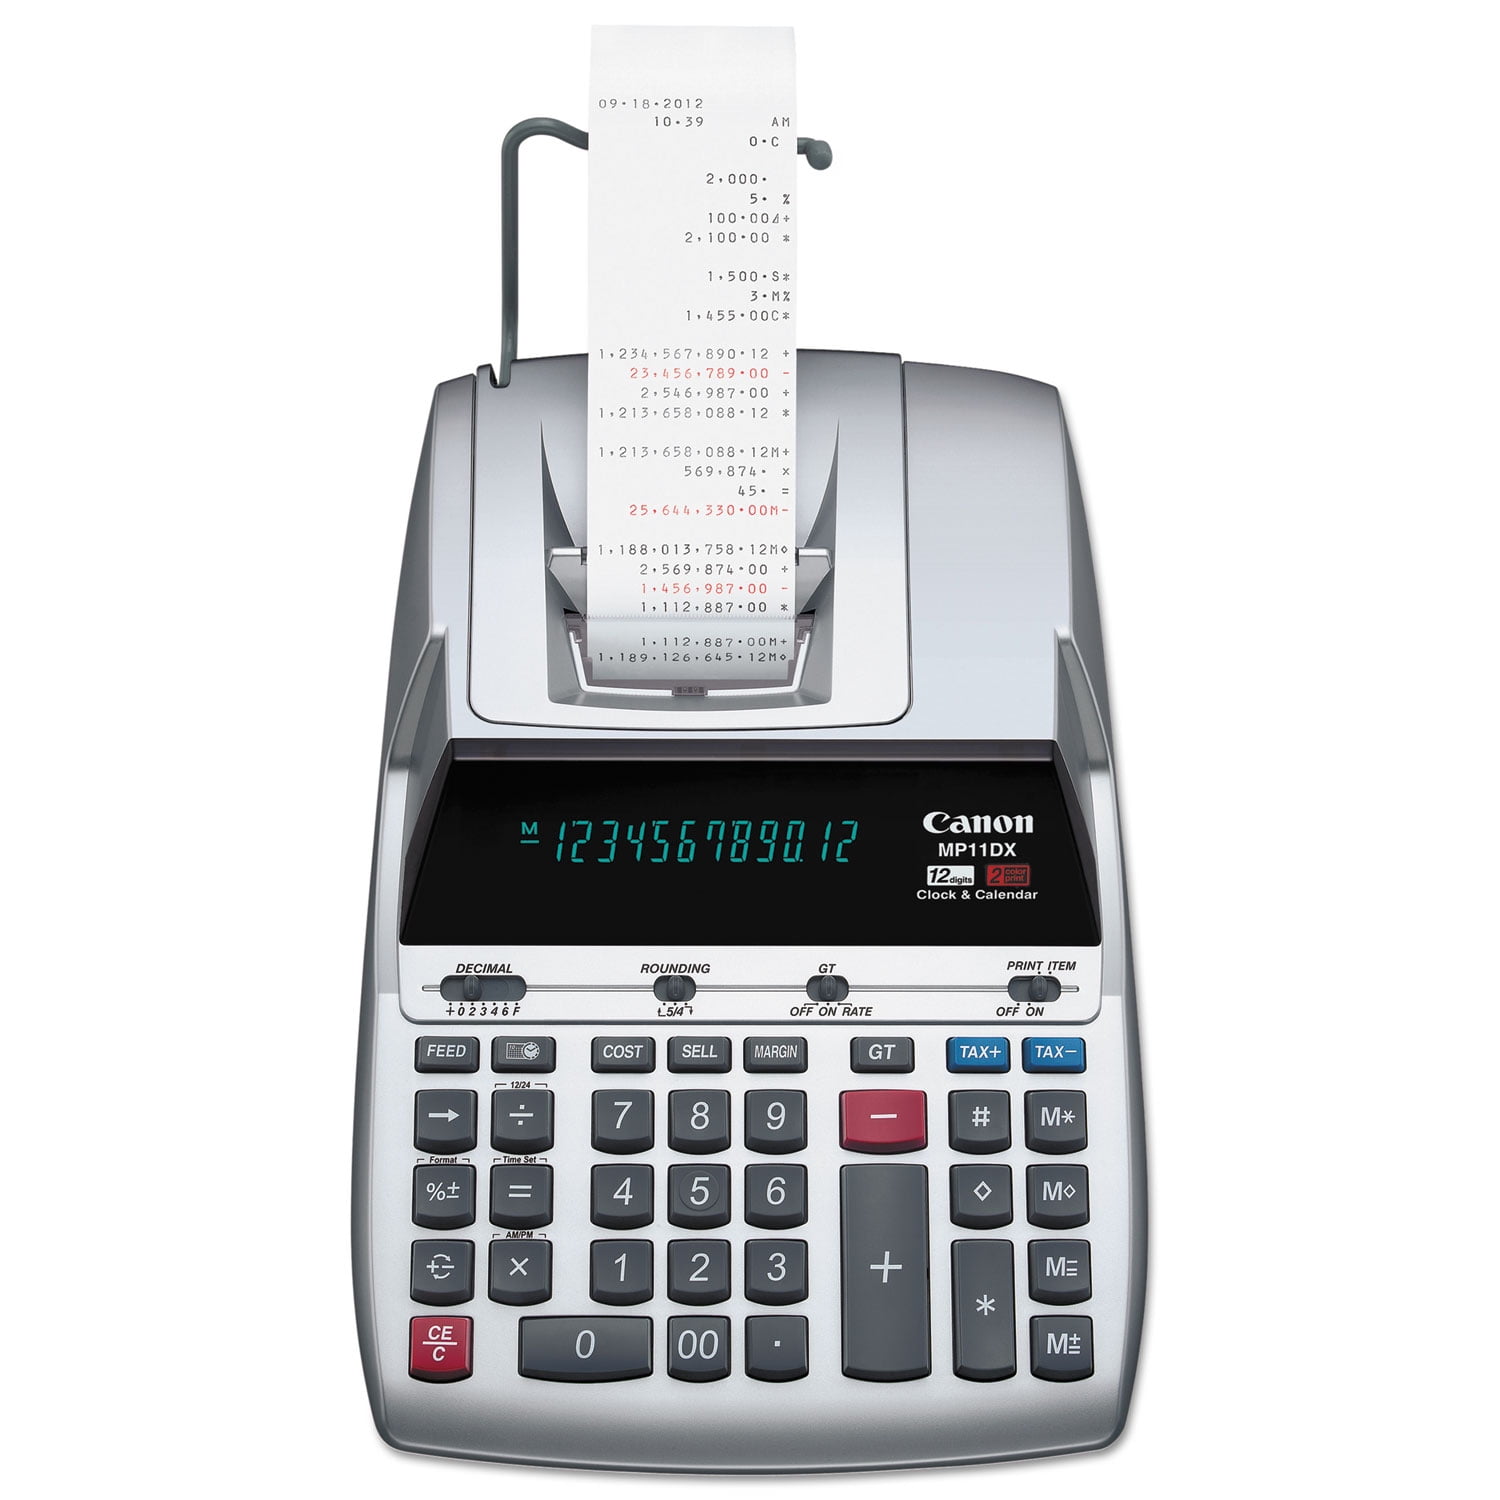 Canon MP11DX Printing Calculator for sale online